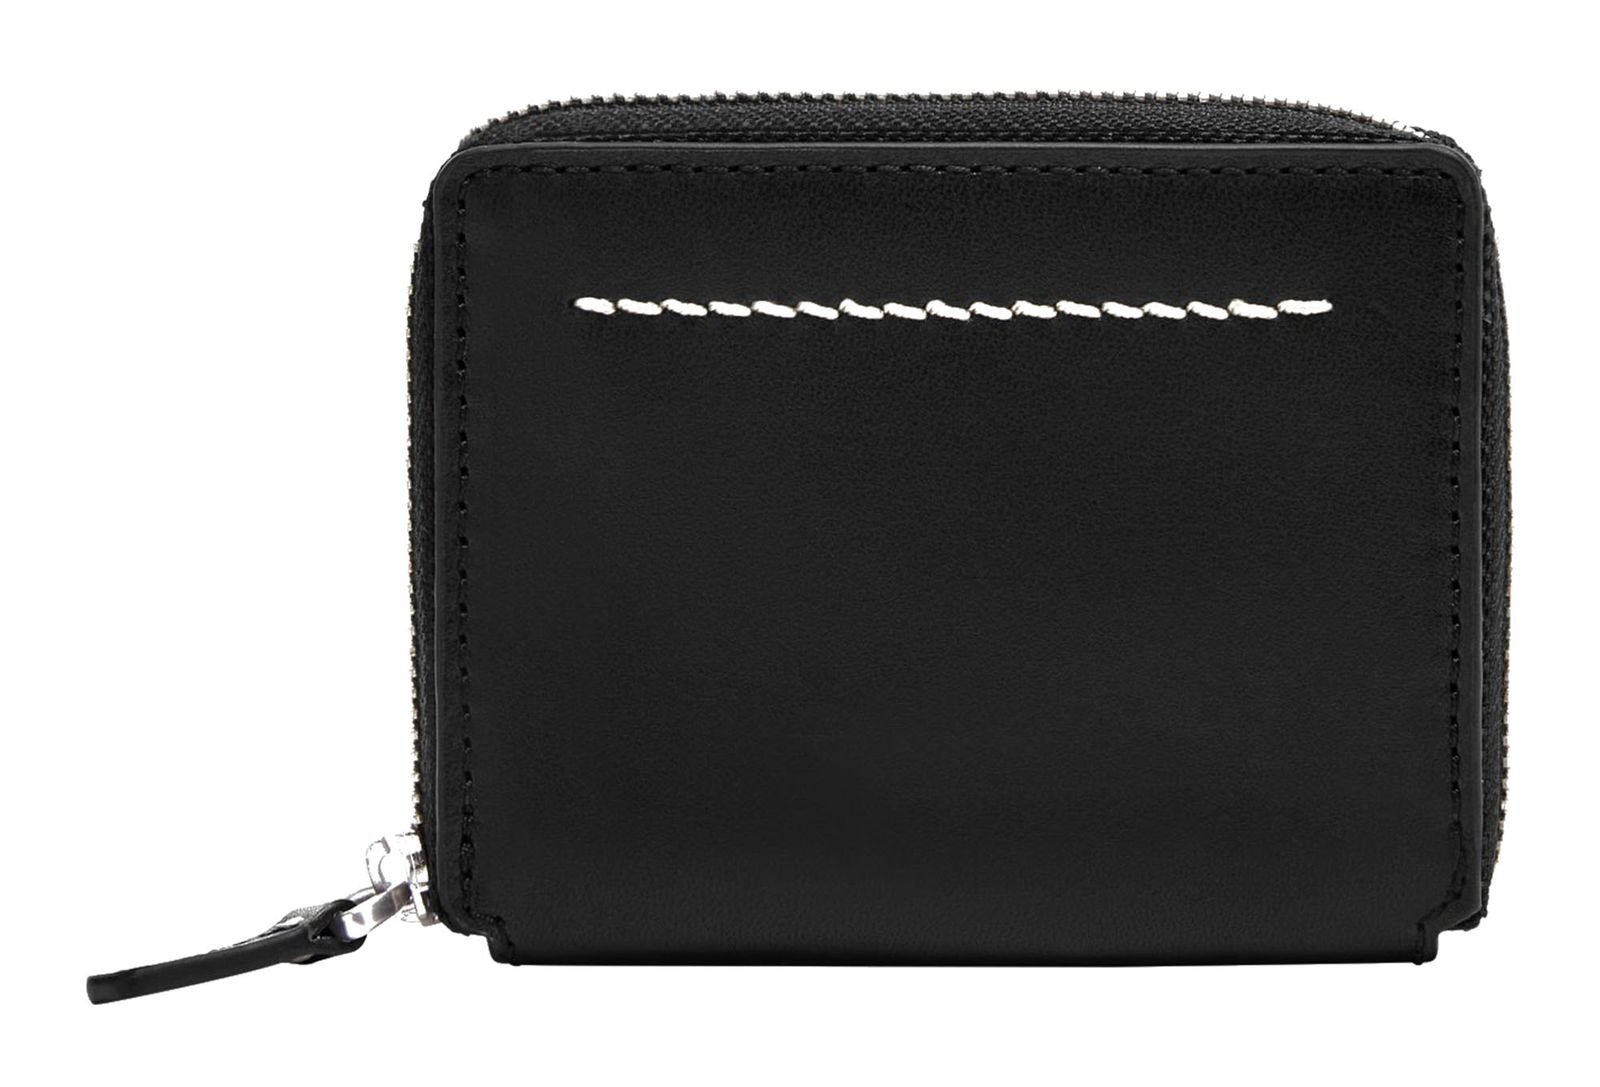 FOSSIL card case Westover Card Case Black | Buy bags, purses ...